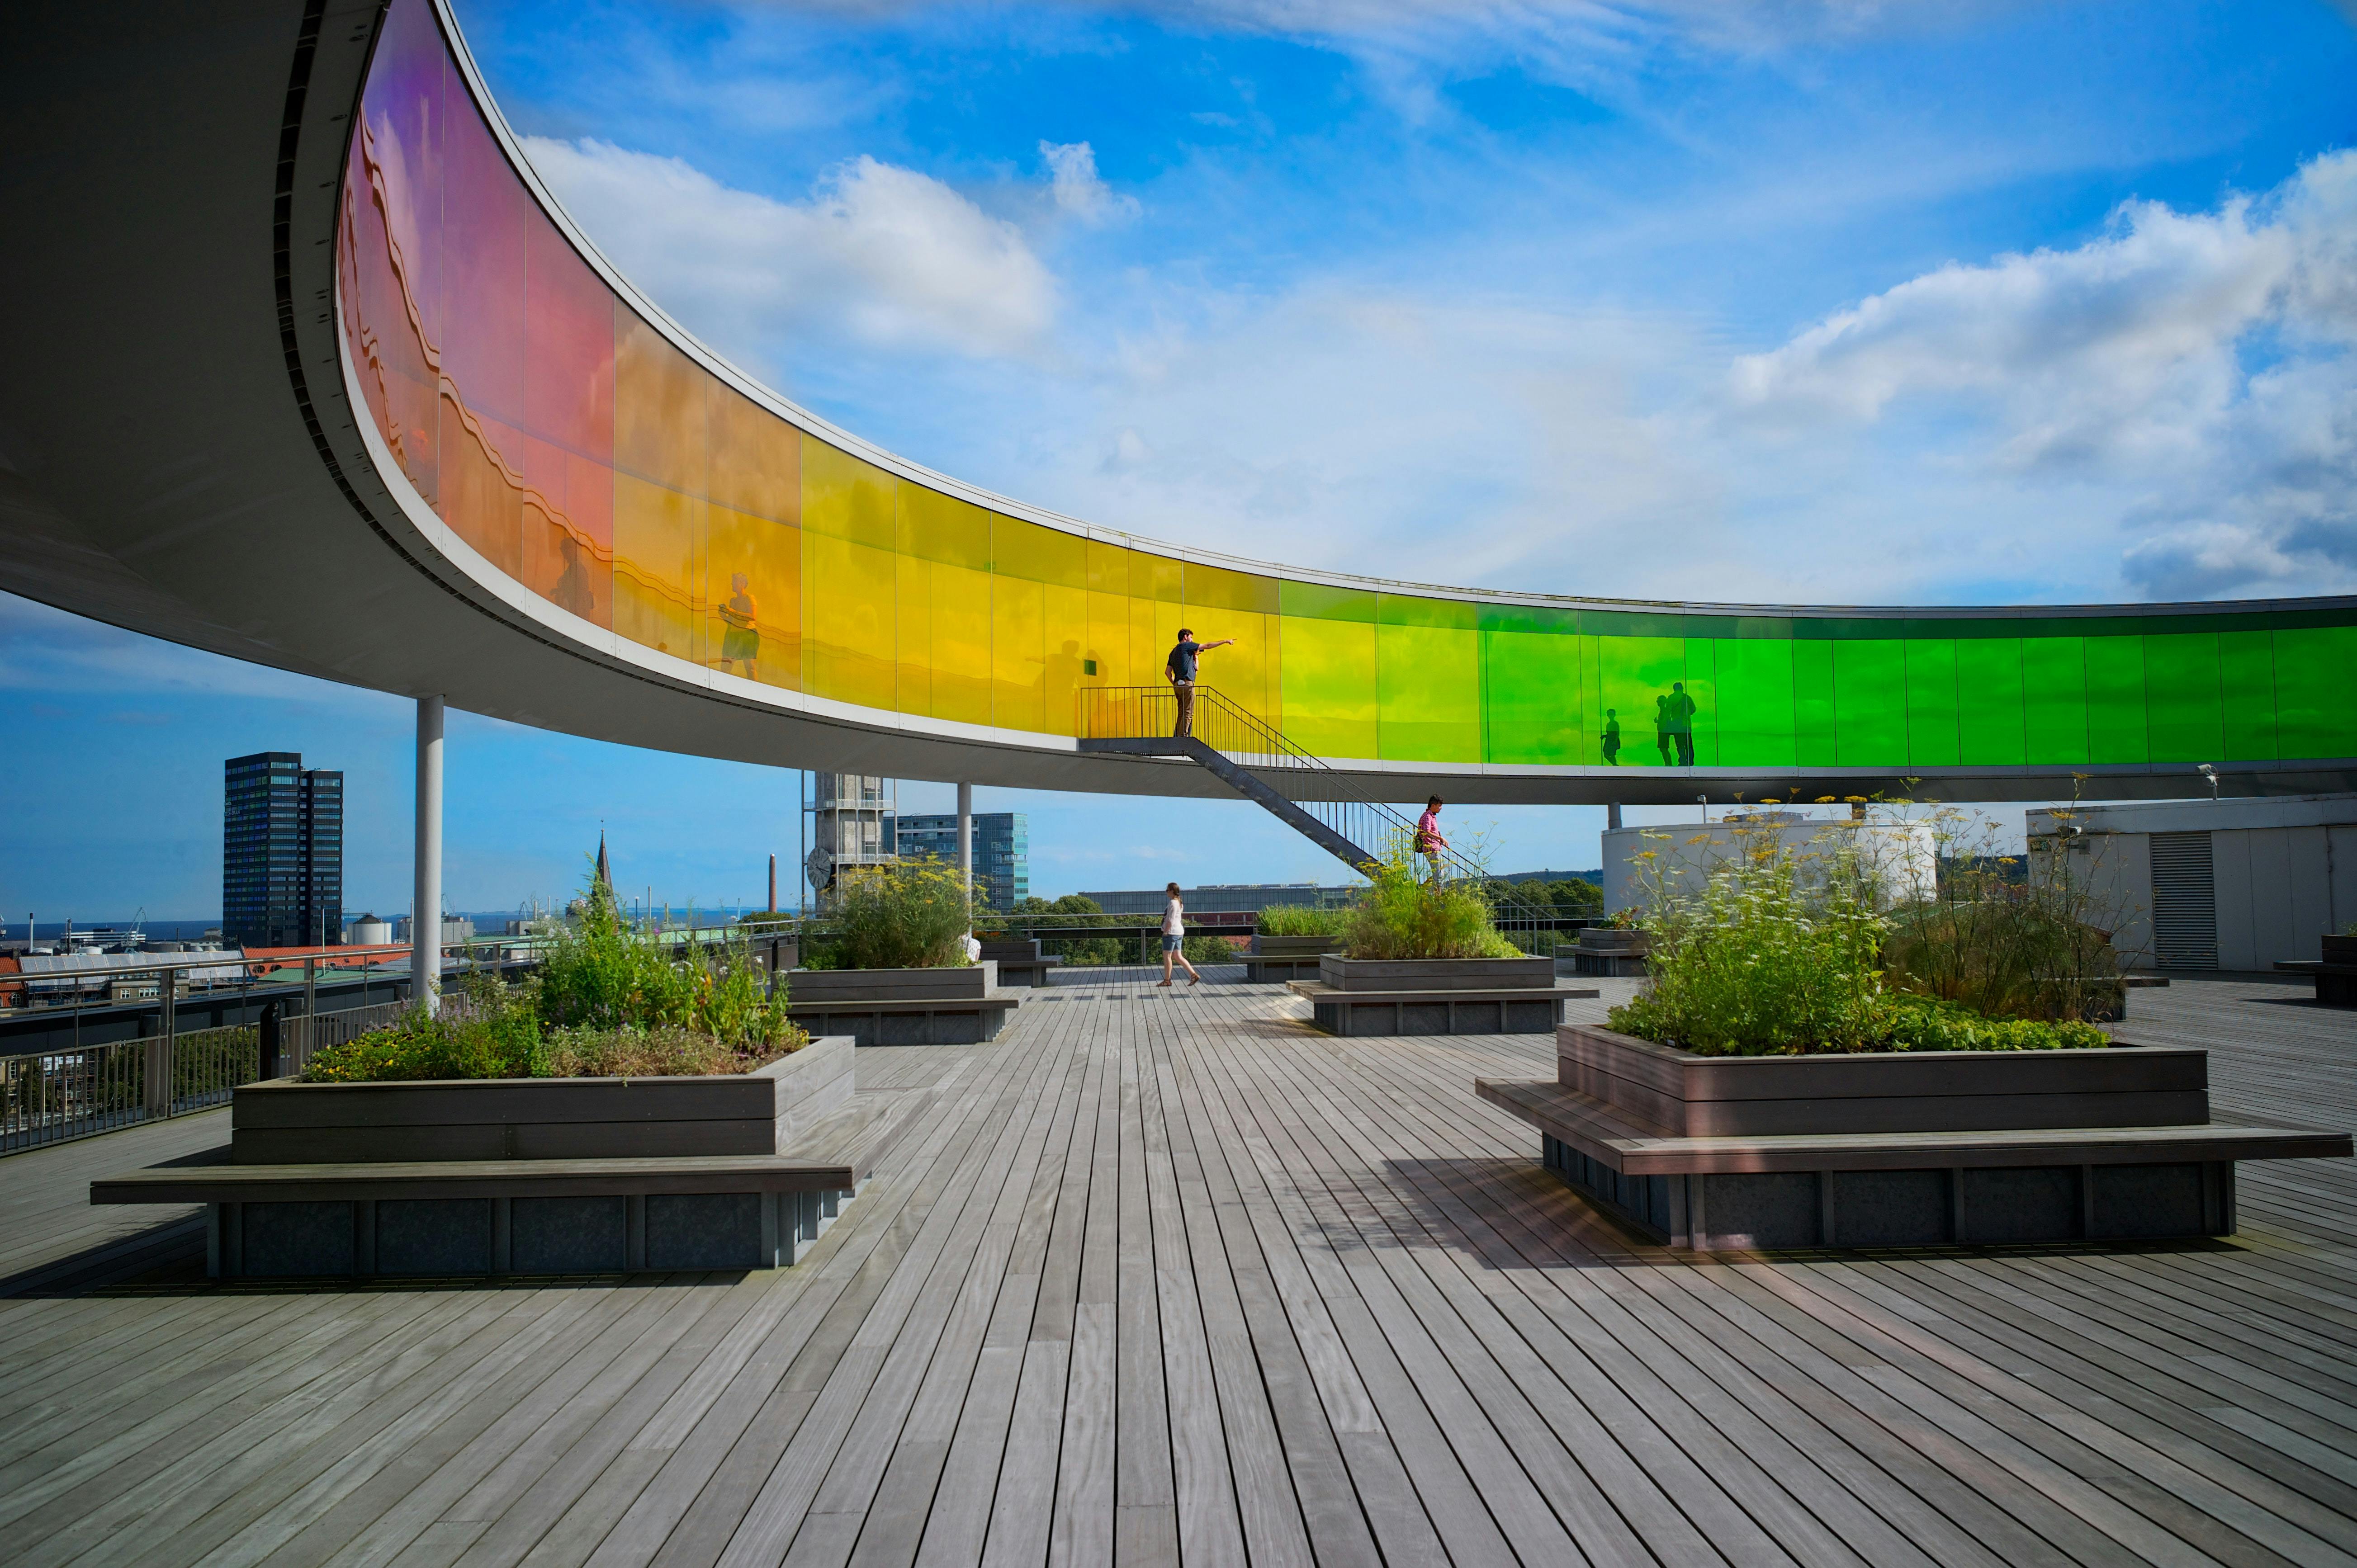 Explore Aarhus in 1 hour with a local